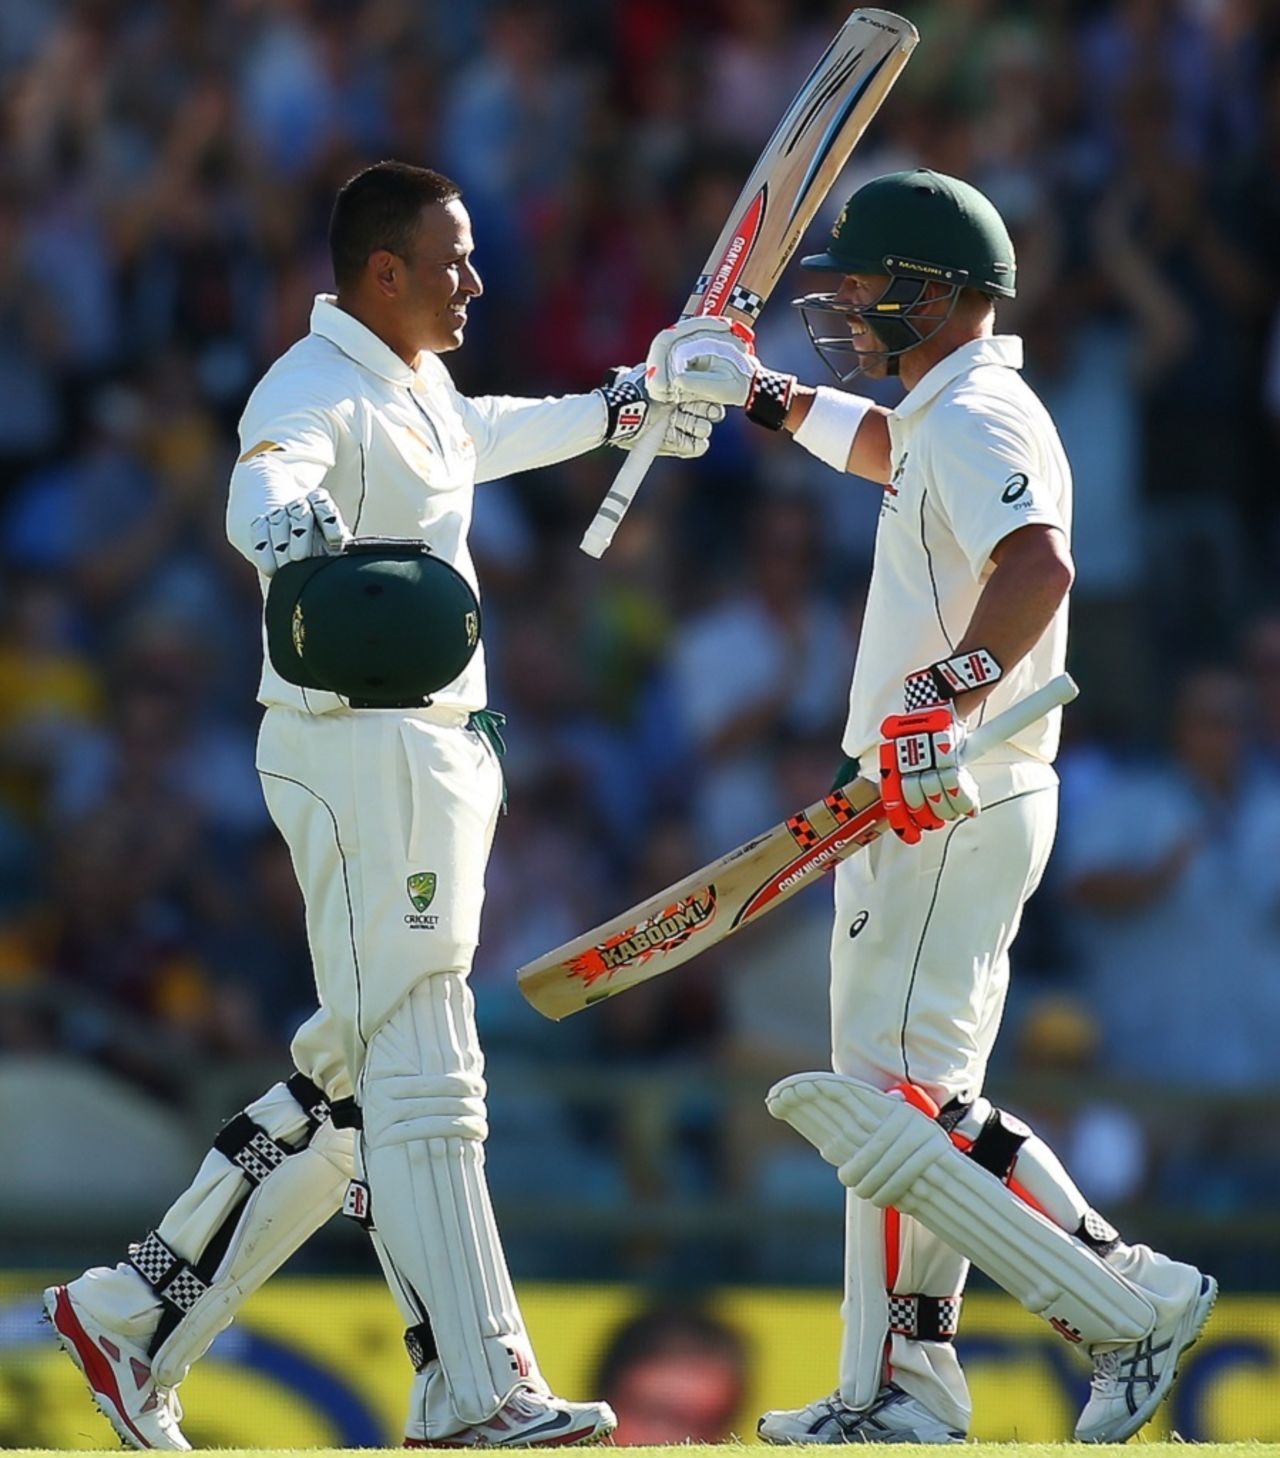 Usman Khawaja is congratulated by David Warner after he completed his ton, Australia v New Zealand, 2nd Test, Perth, 1st day, November 13, 2015